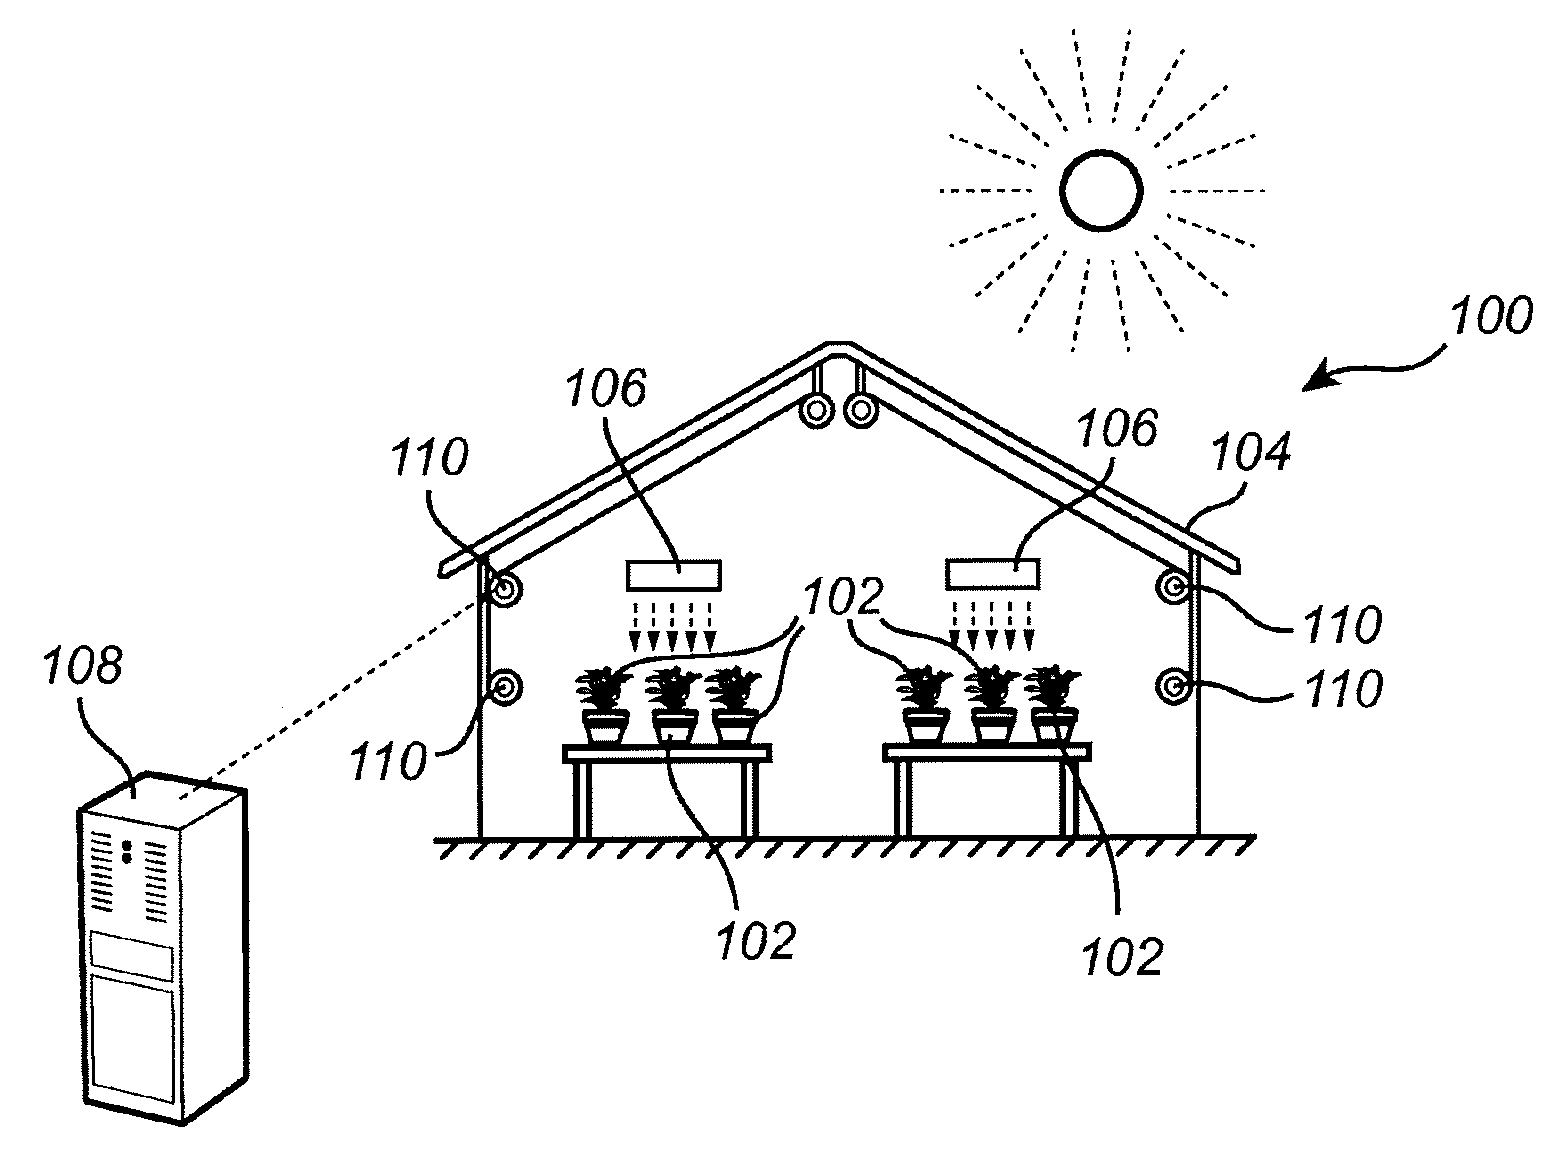 Method for controlling a growth cycle for growing plants using state oriented control